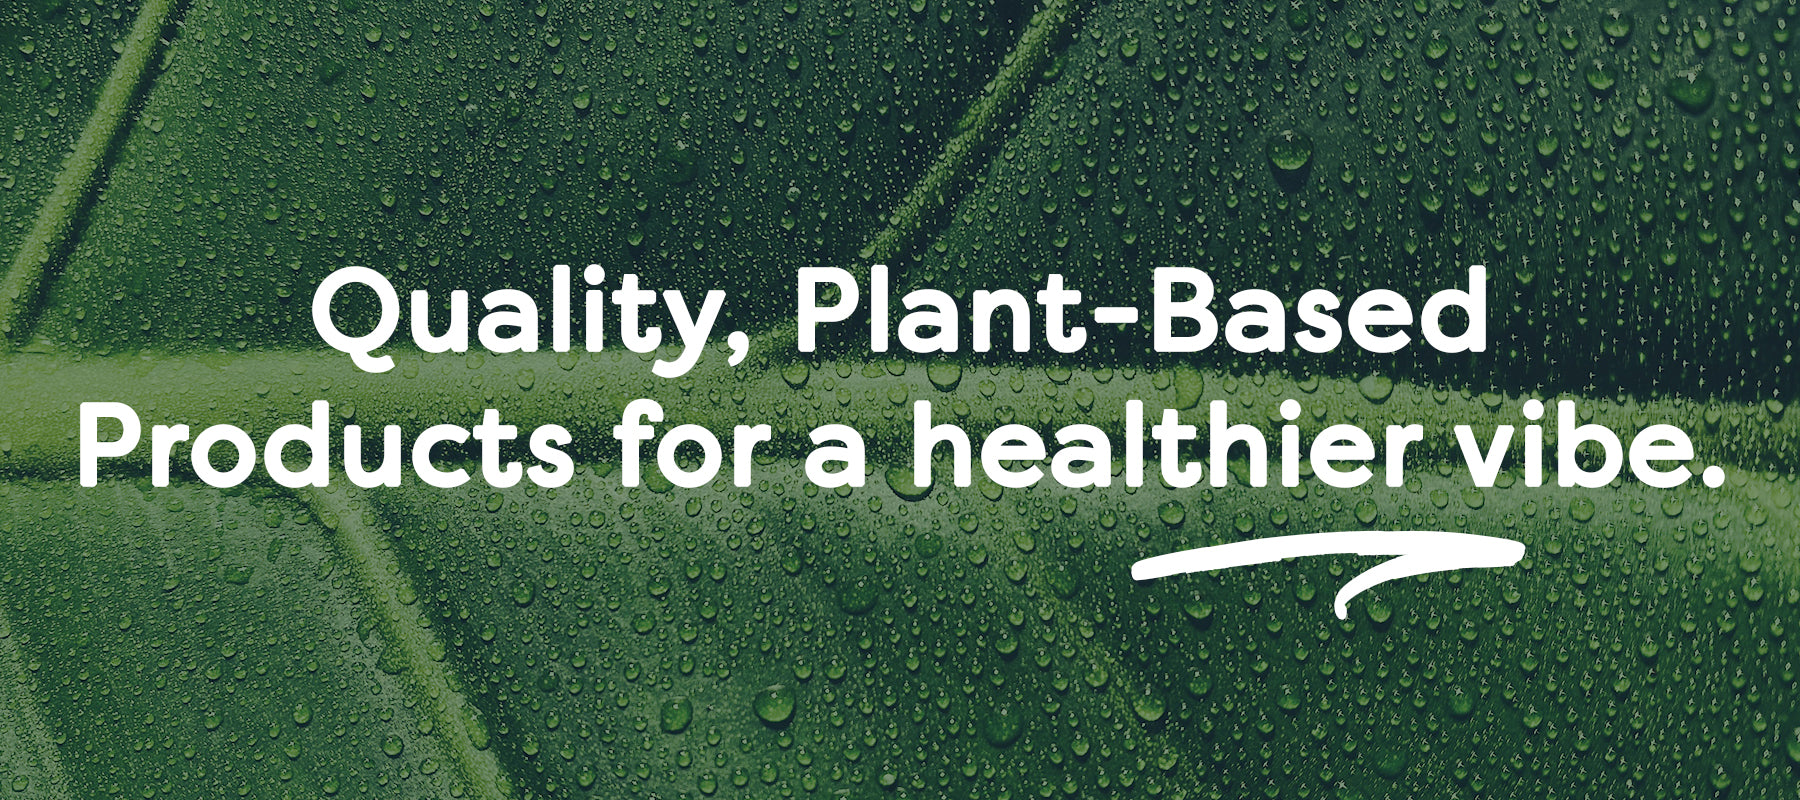 Desirable Secrets Quality Plant-based products for a healthier vibe.